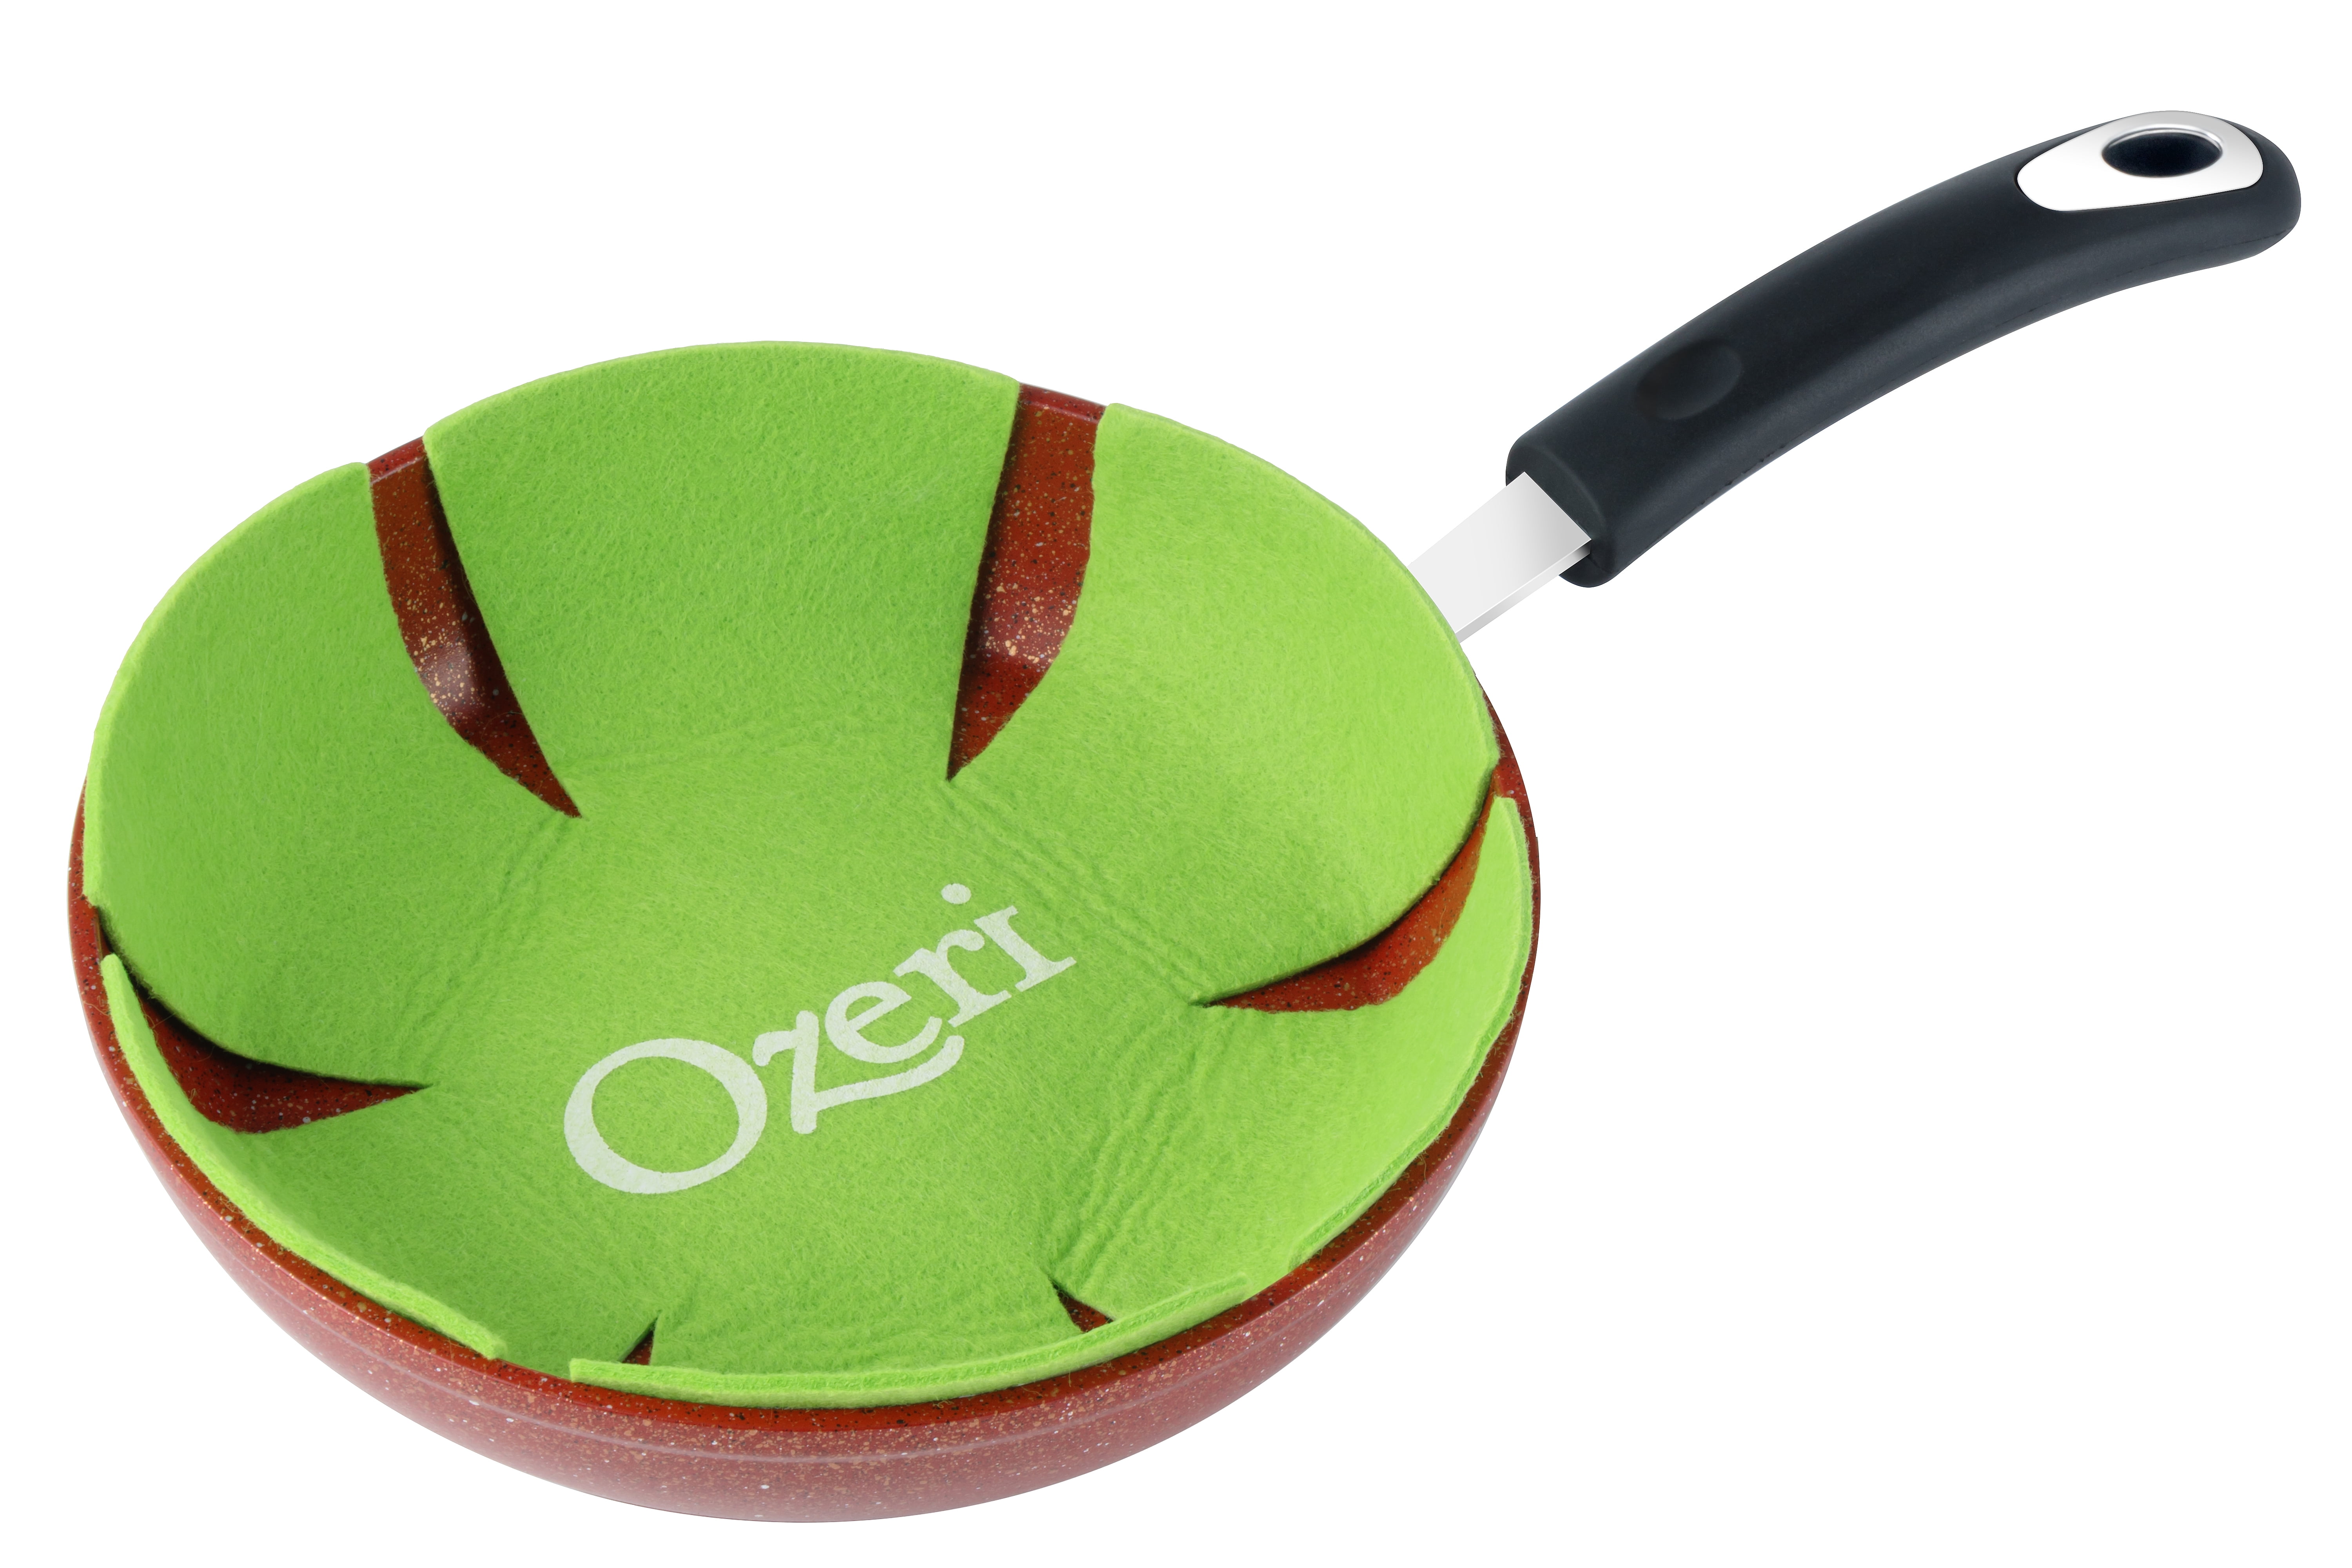  10 (26 cm) Stainless Steel Pan by Ozeri with ETERNA, a 100%  PFOA and APEO-Free Non-Stick Coating: Home & Kitchen